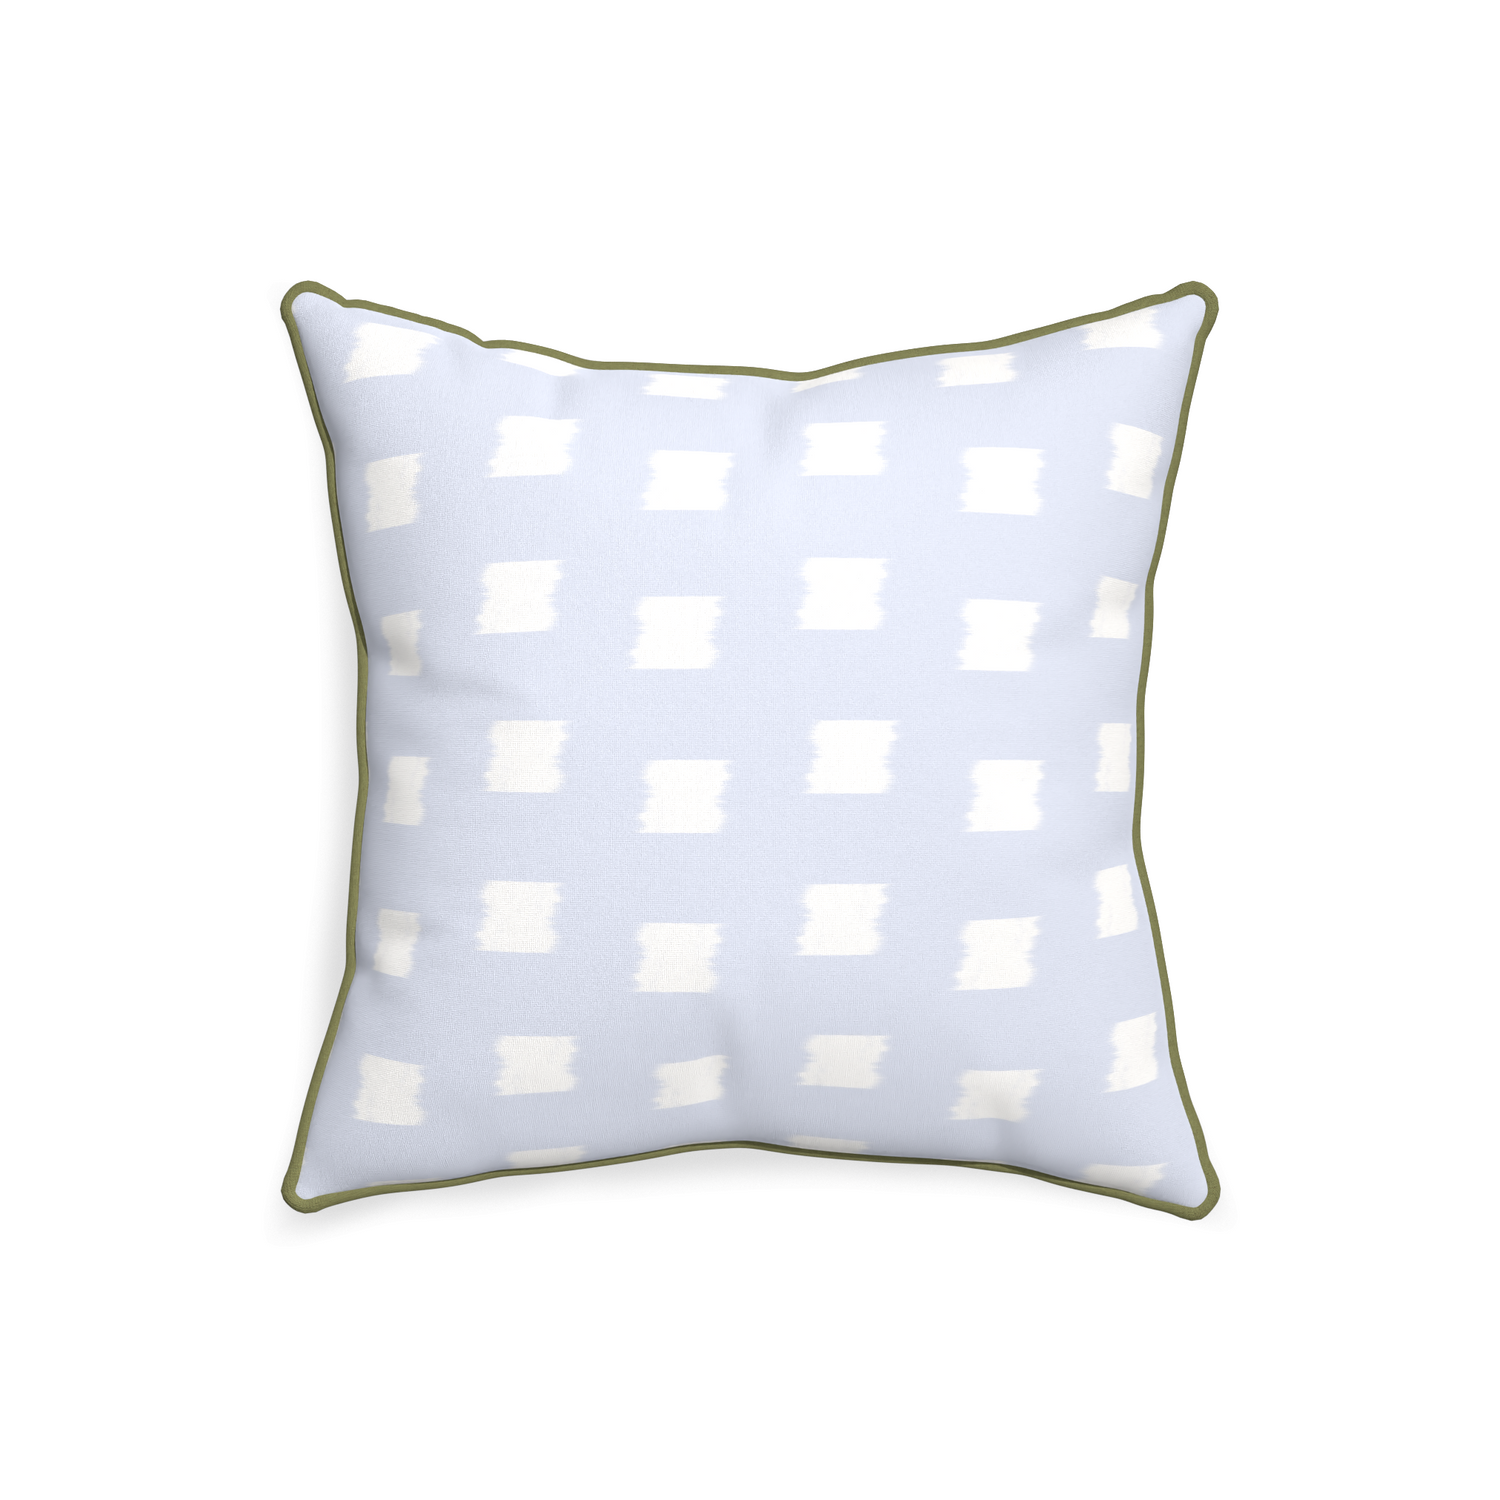 20-square denton custom sky blue patternpillow with moss piping on white background